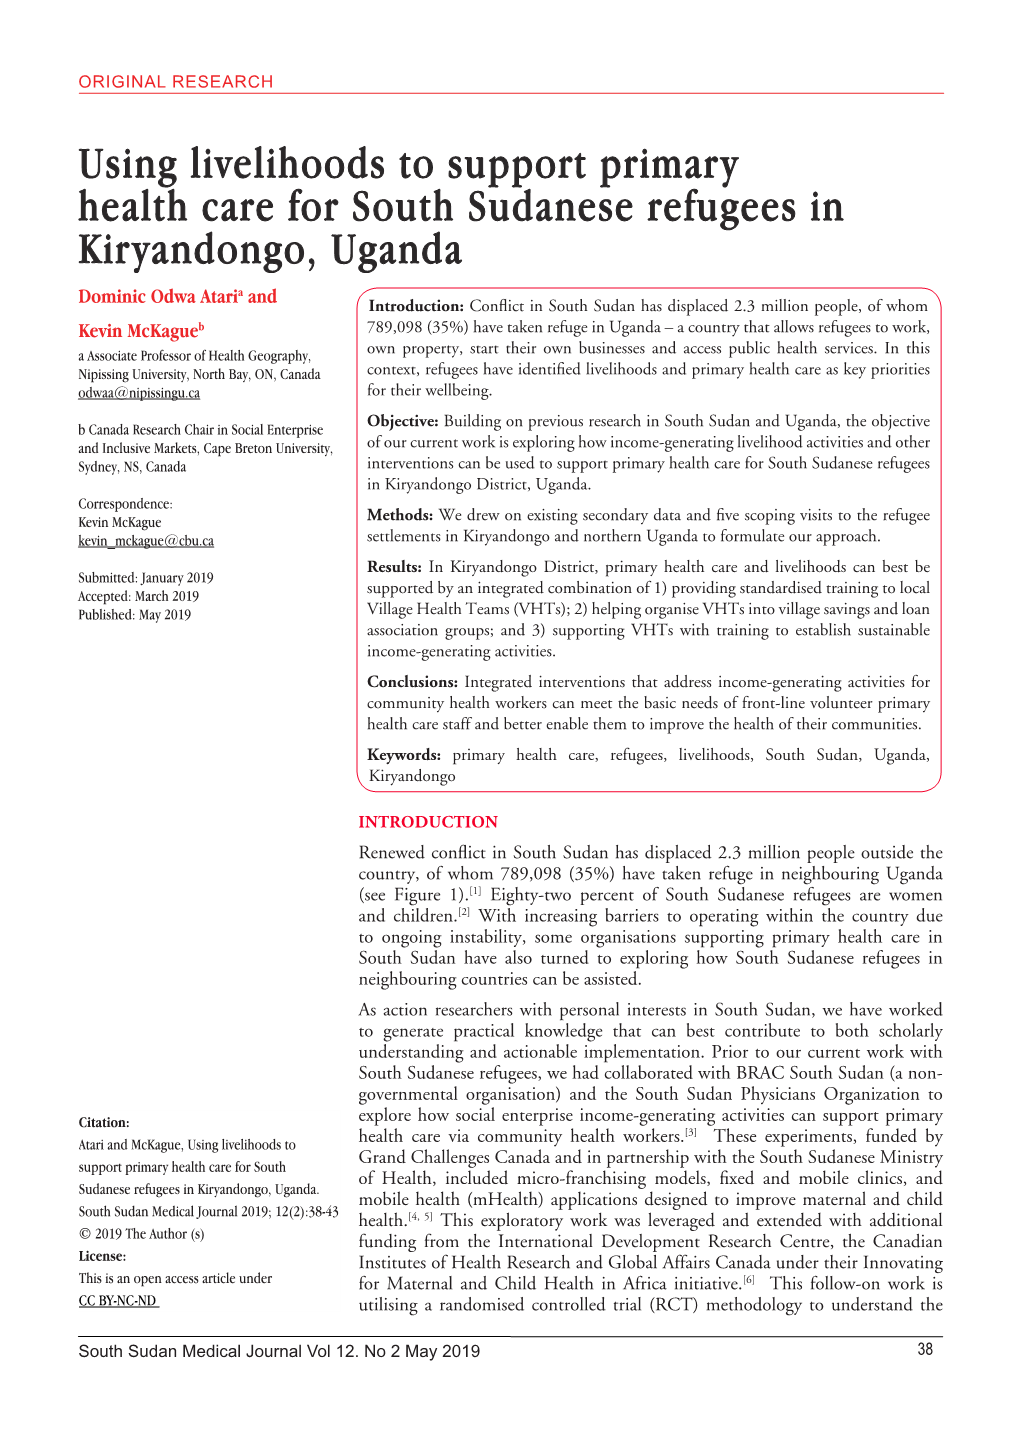 Using Livelihoods to Support Primary Health Care for South Sudanese Refugees in Kiryandongo, Uganda